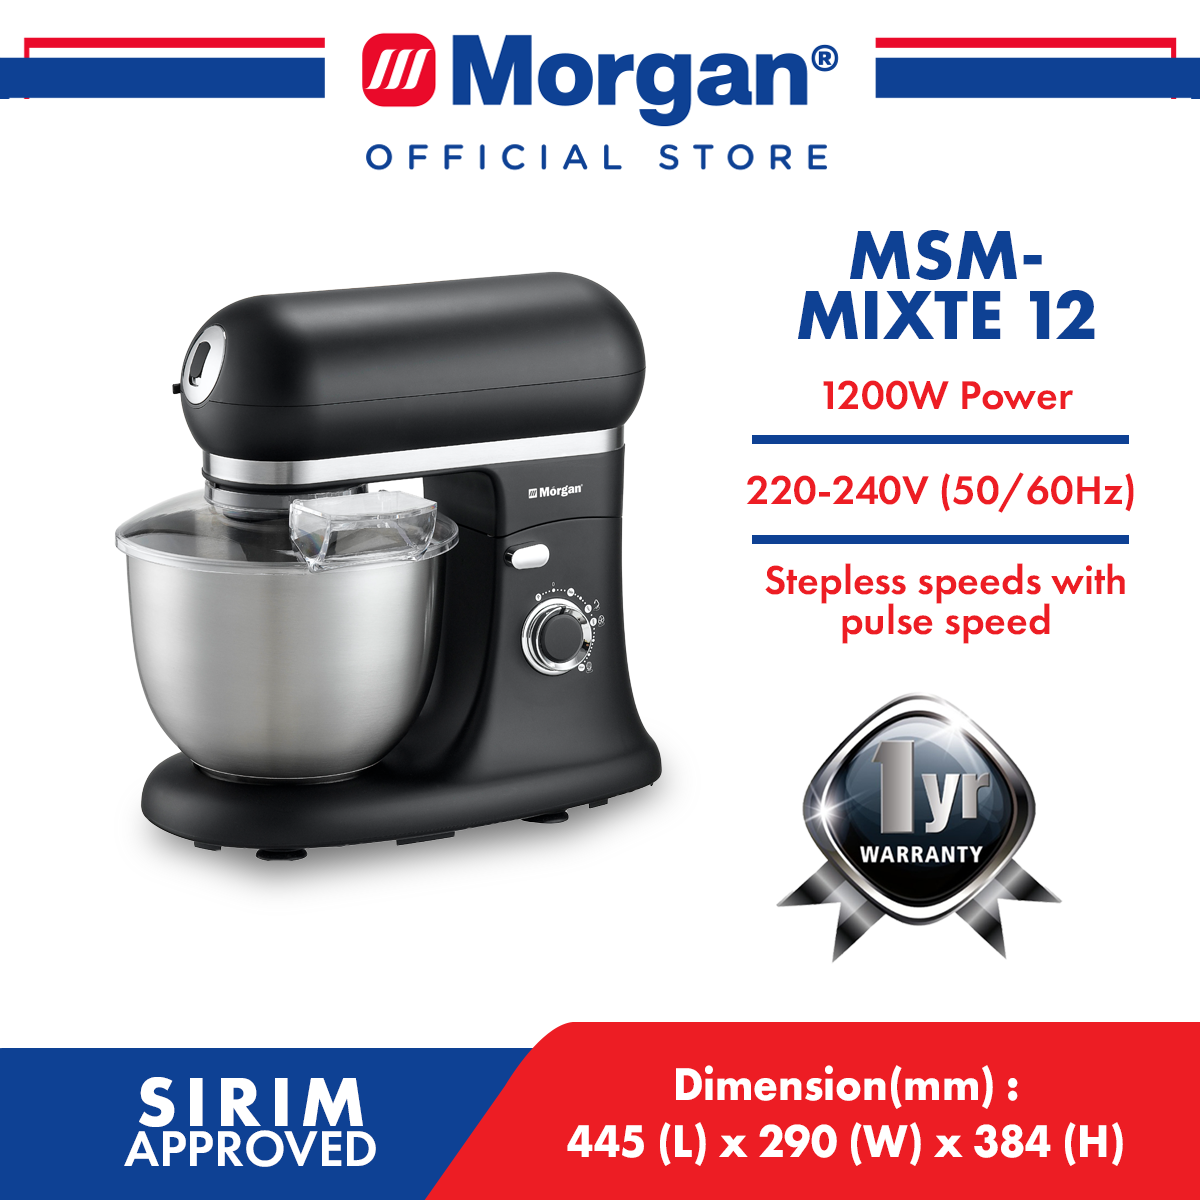 MORGAN MSM-MIXTE 12 STAND MIXER 1200W 5.5L STAINLESS STEEL BOWL